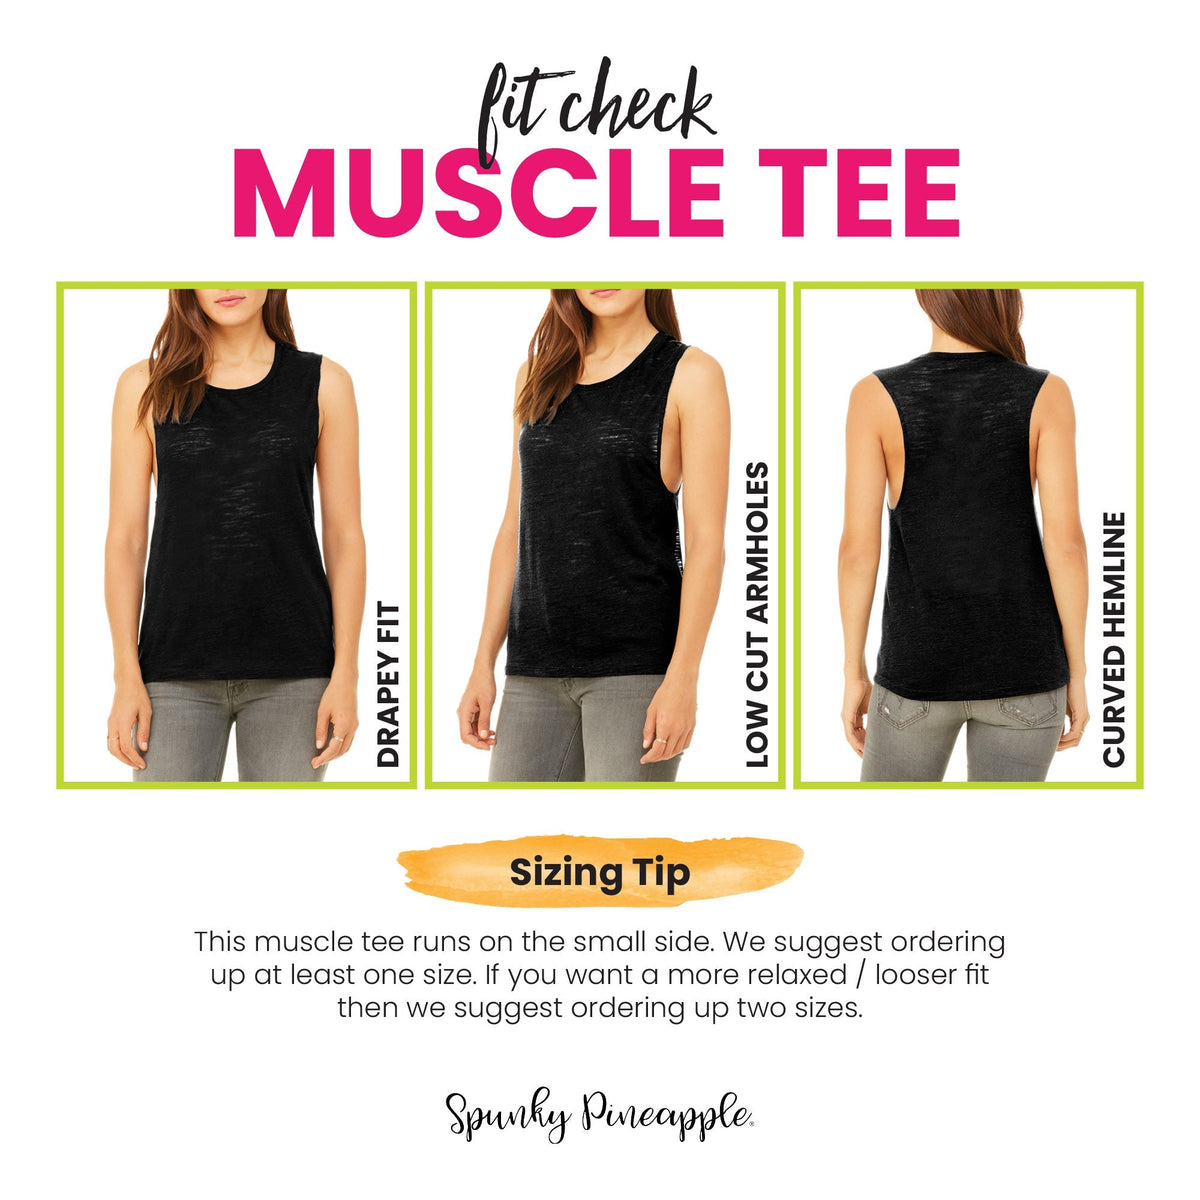 I Like Them Thick and Sprucey Muscle Tee